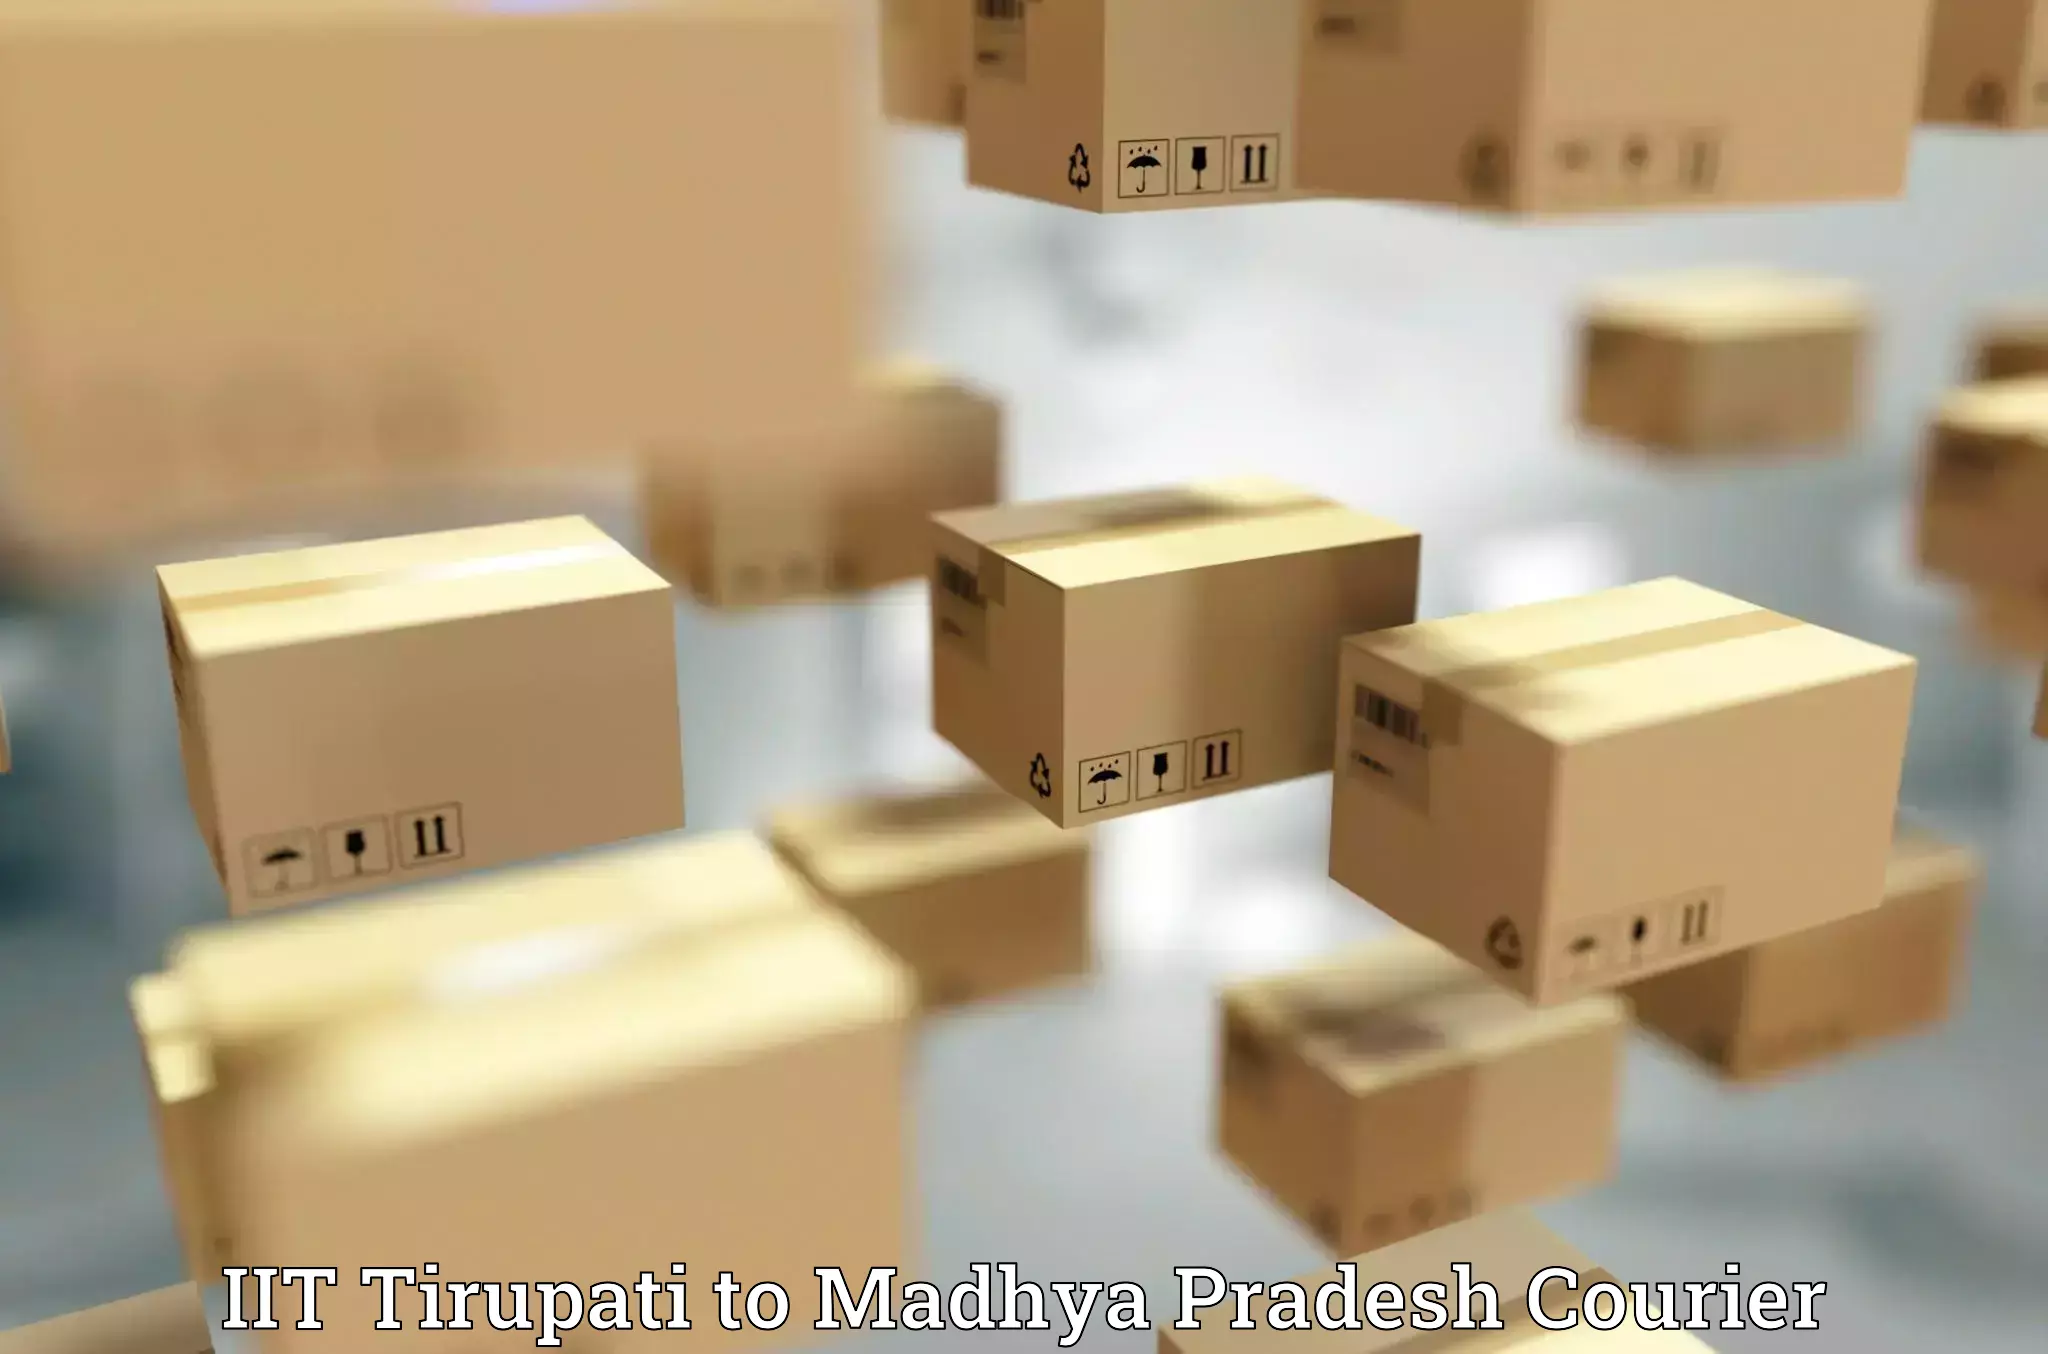 Express delivery capabilities in IIT Tirupati to Indore